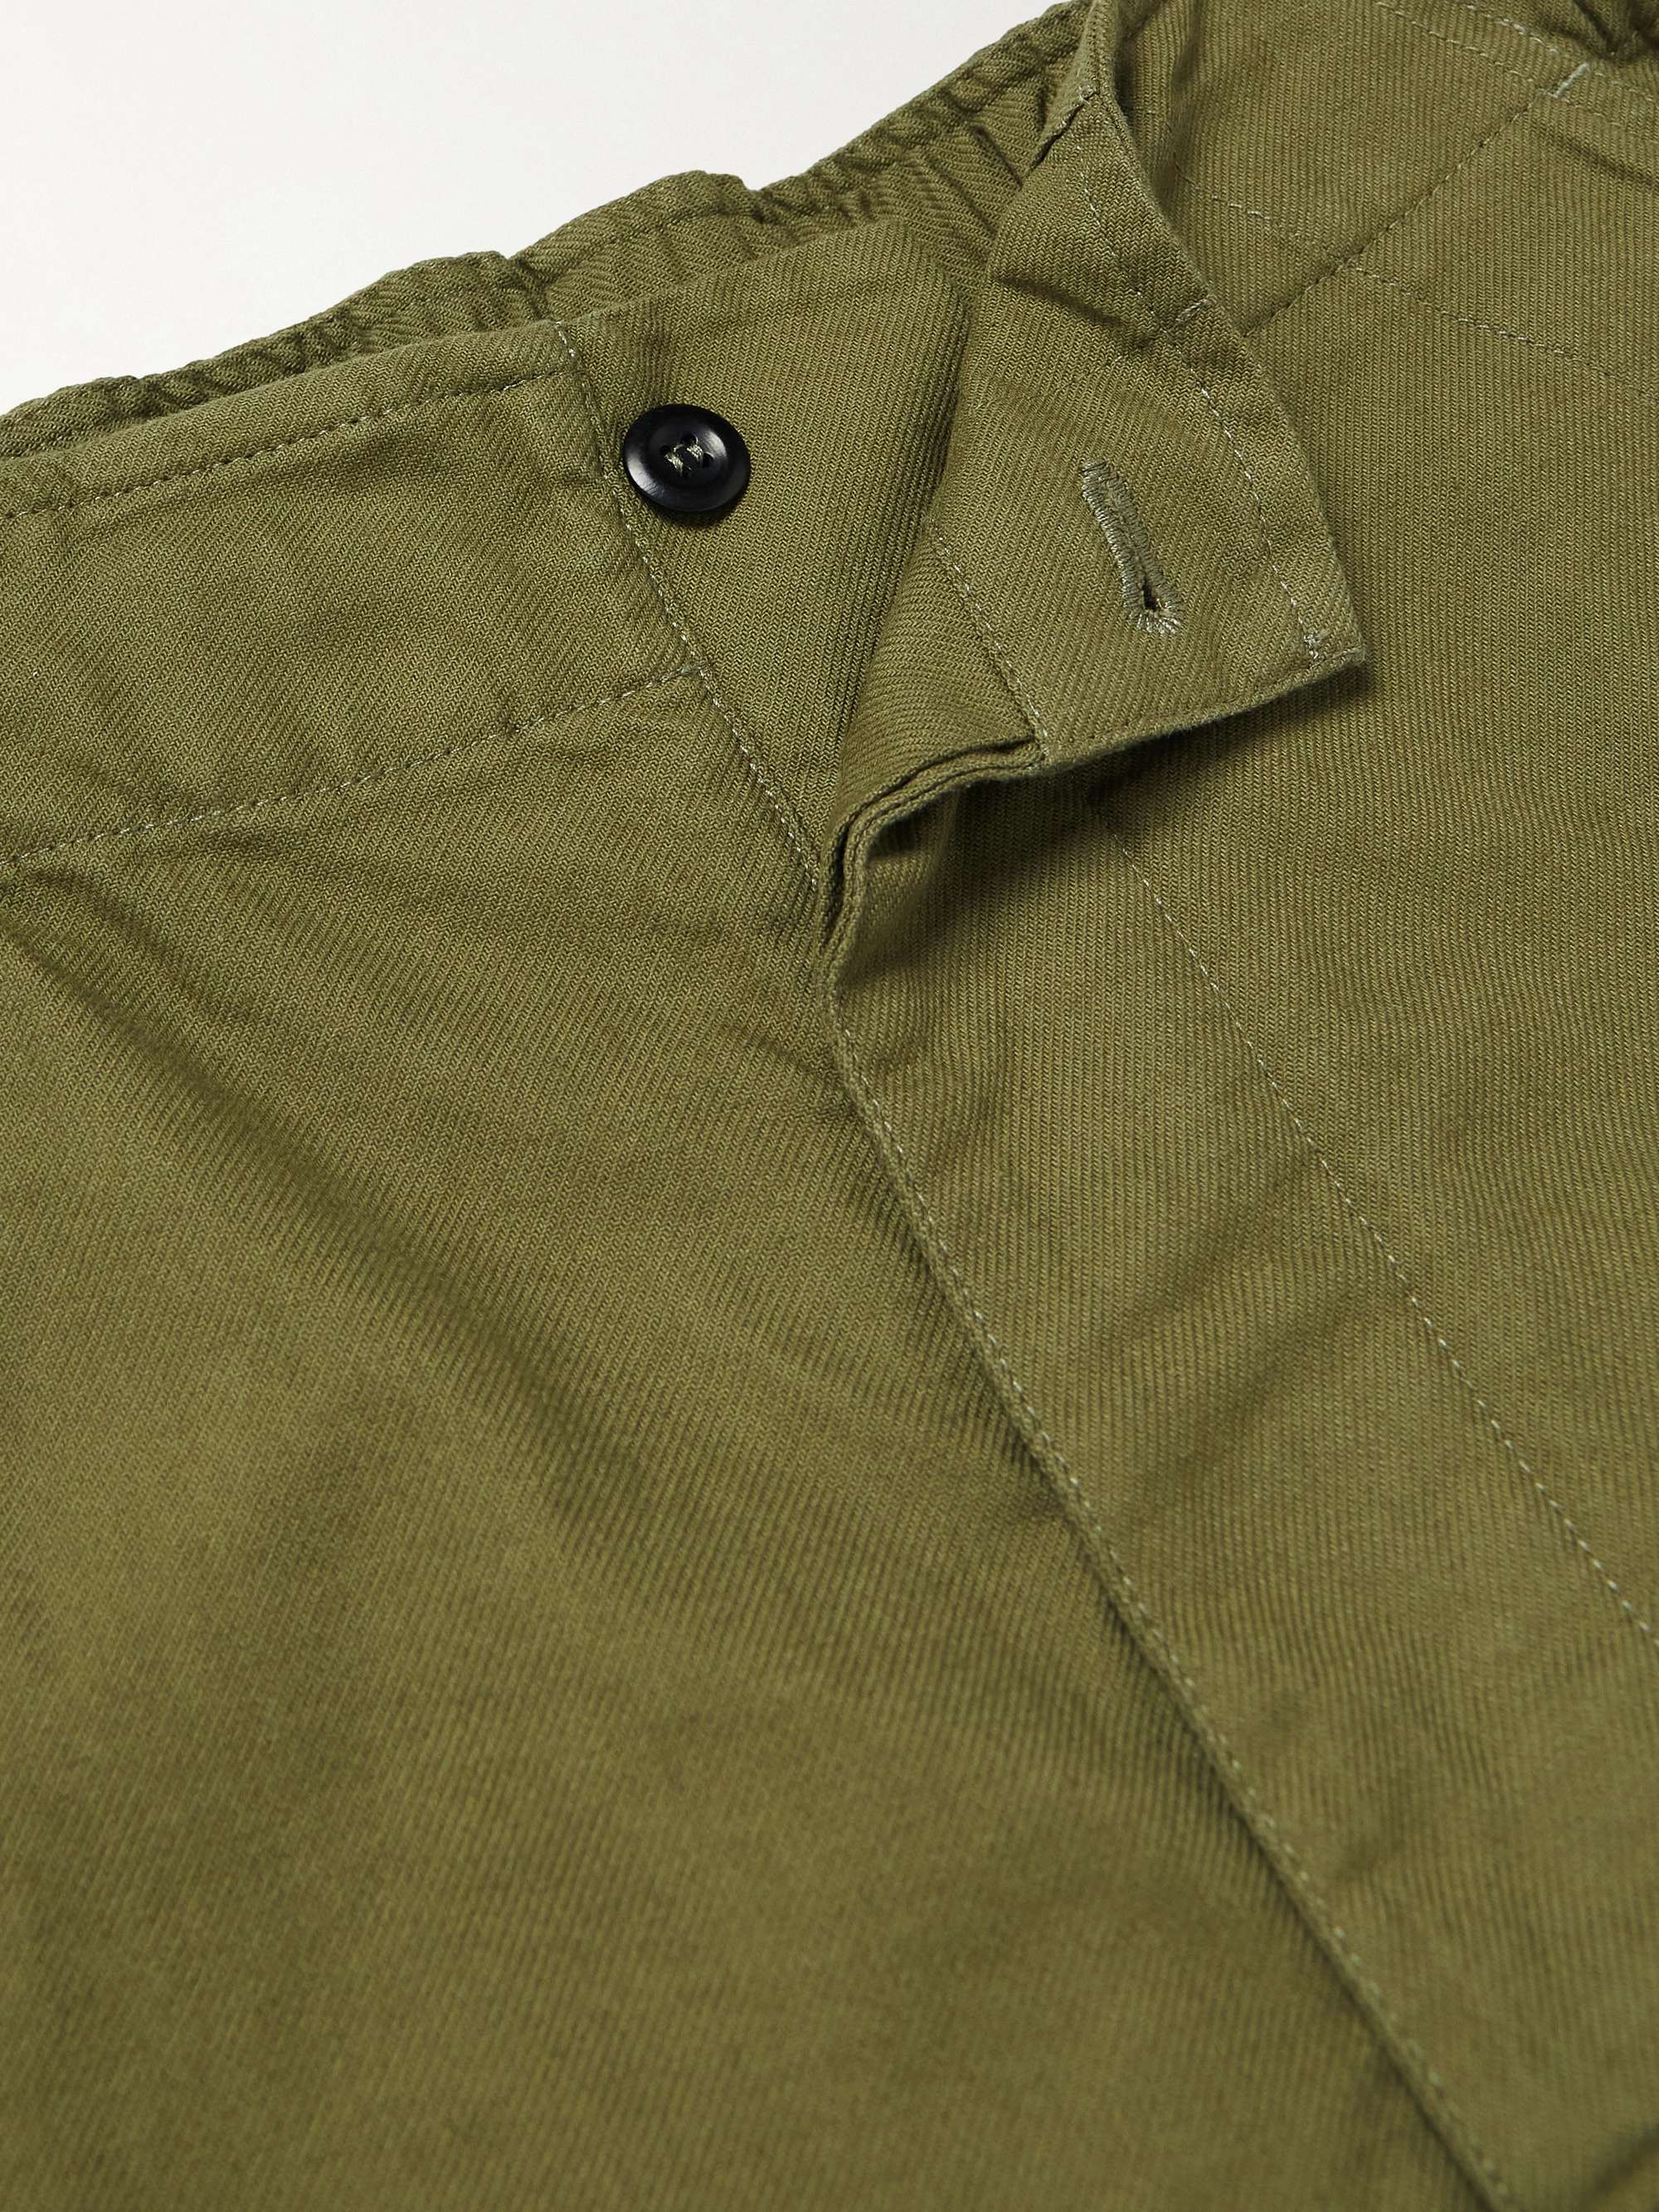 Army green Wide-Leg Cotton-Twill Trousers | MARGARET HOWELL | MR PORTER